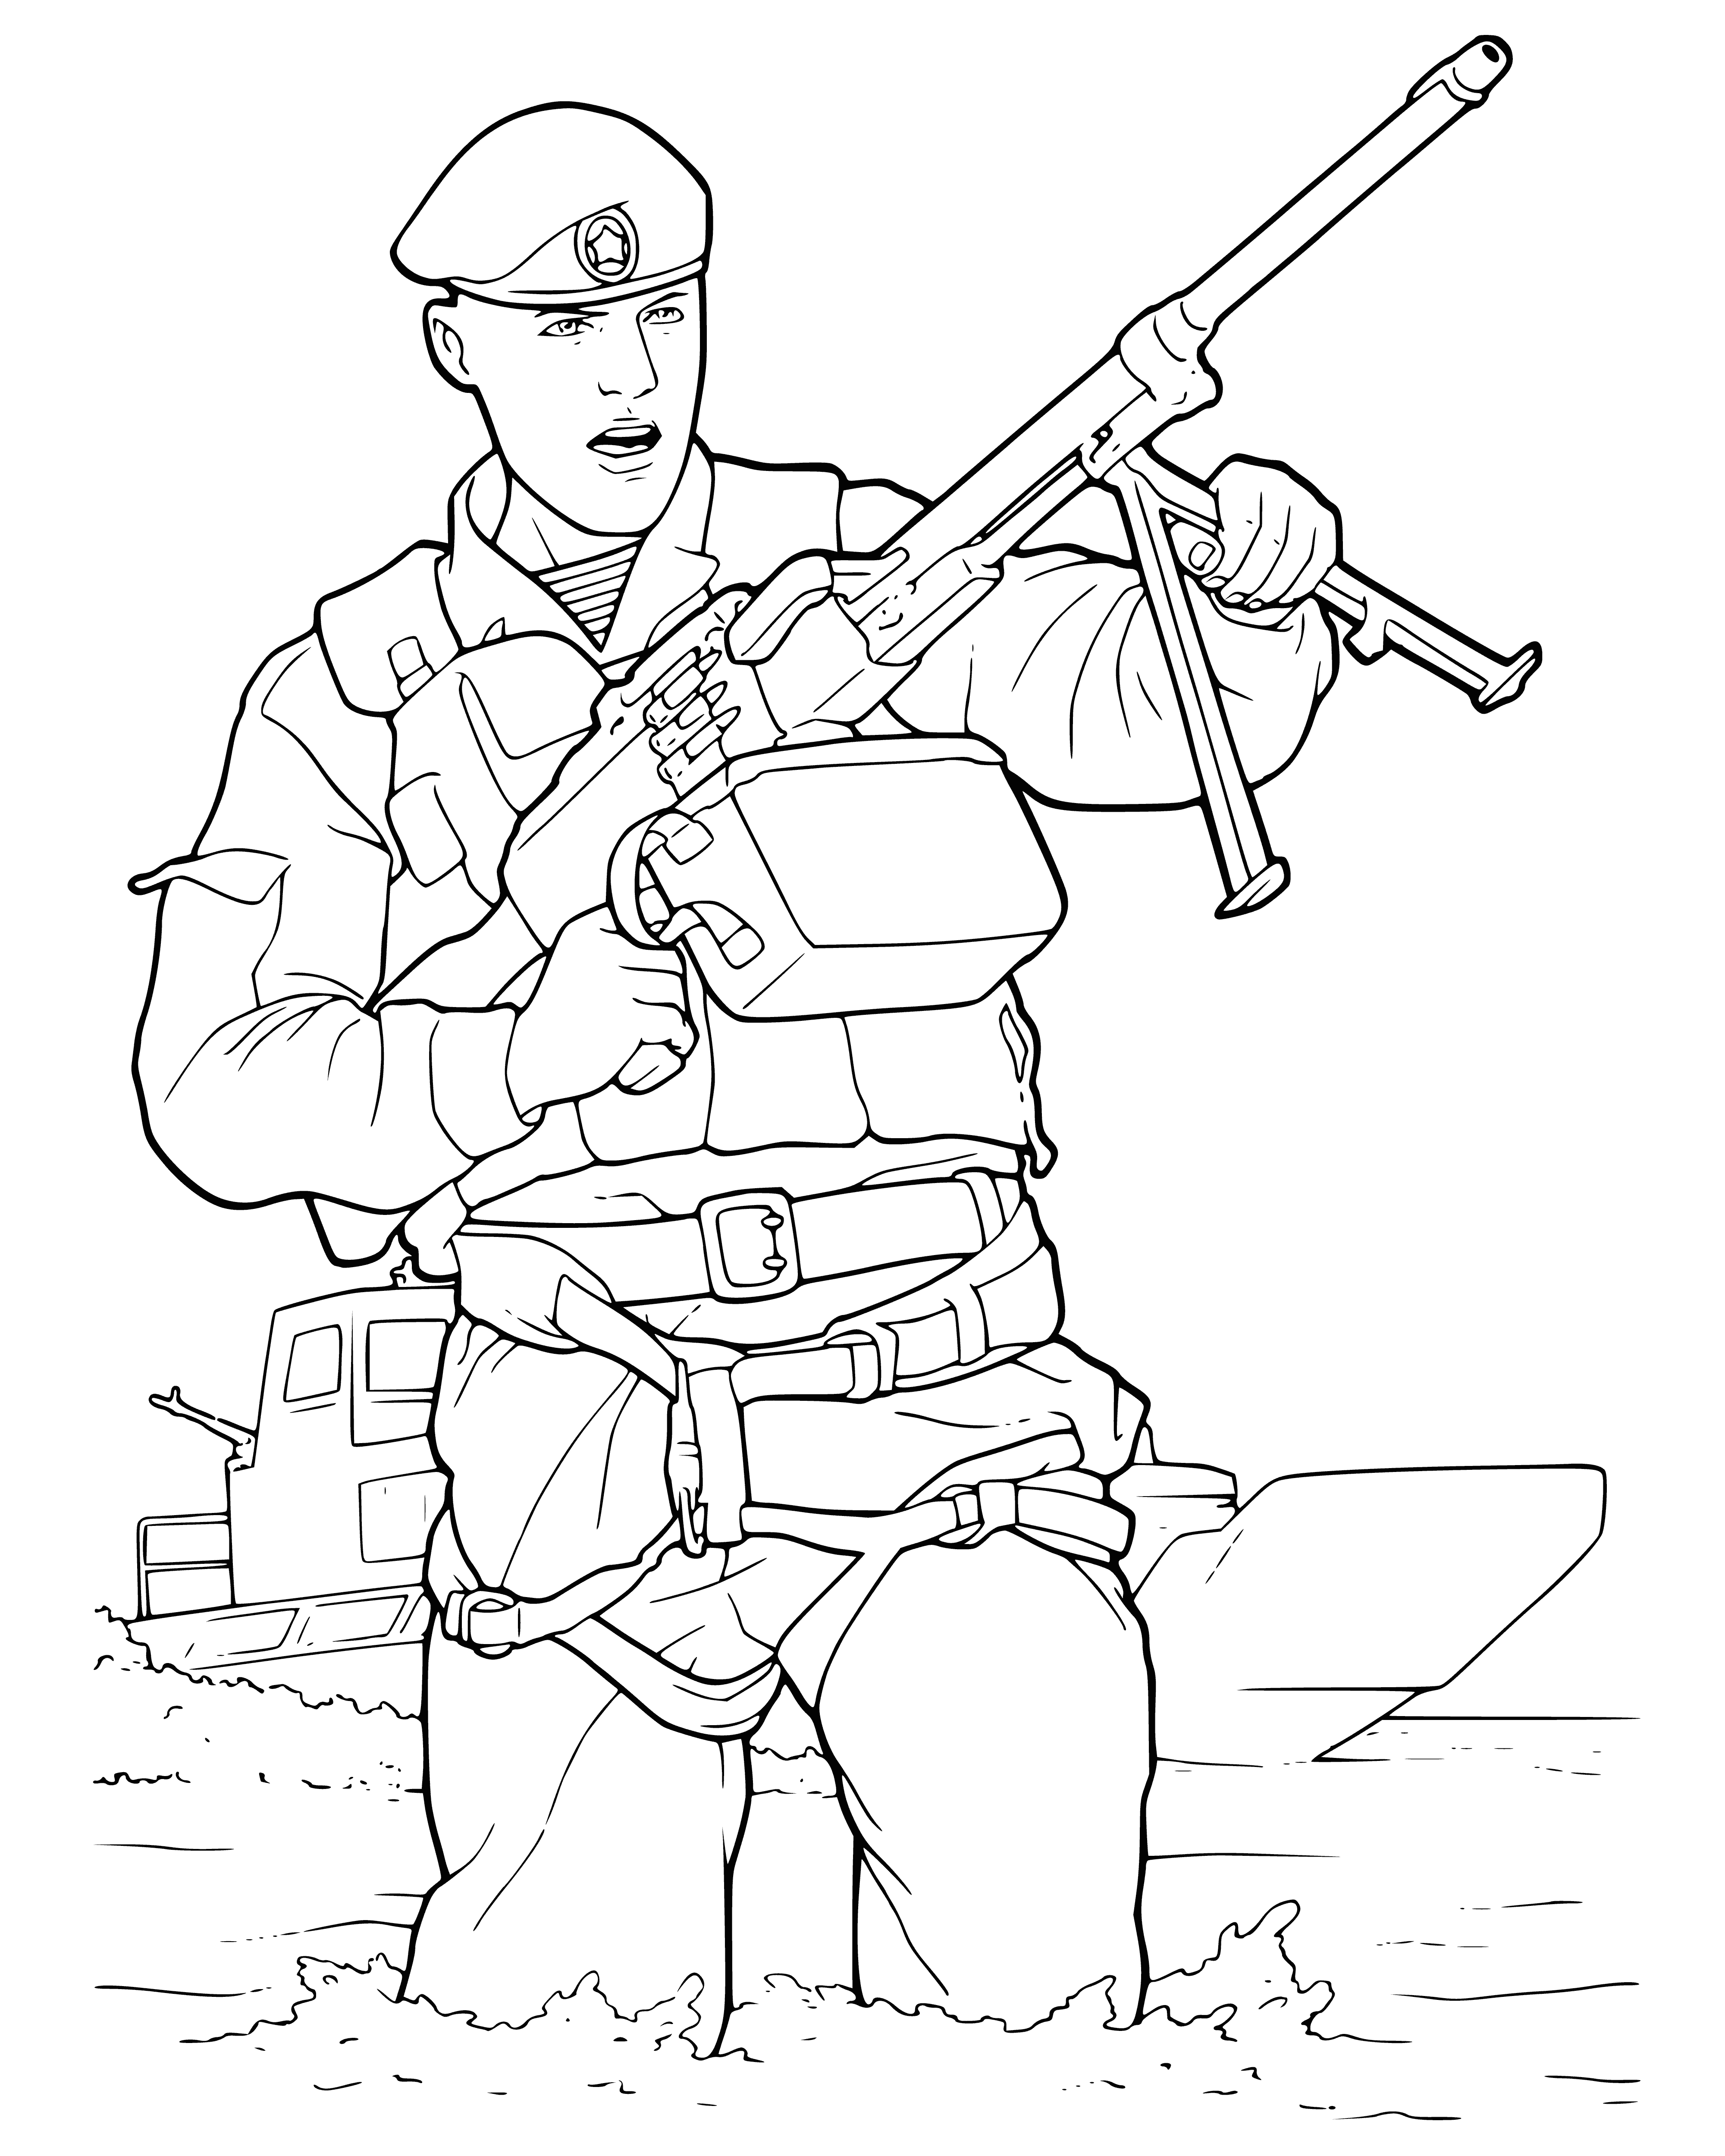 coloring page: U.S. Army: Largest & oldest branch of Armed Forces, 1 million soldiers, three components: active, Reserve, & National Guard. Protecting US & interests.